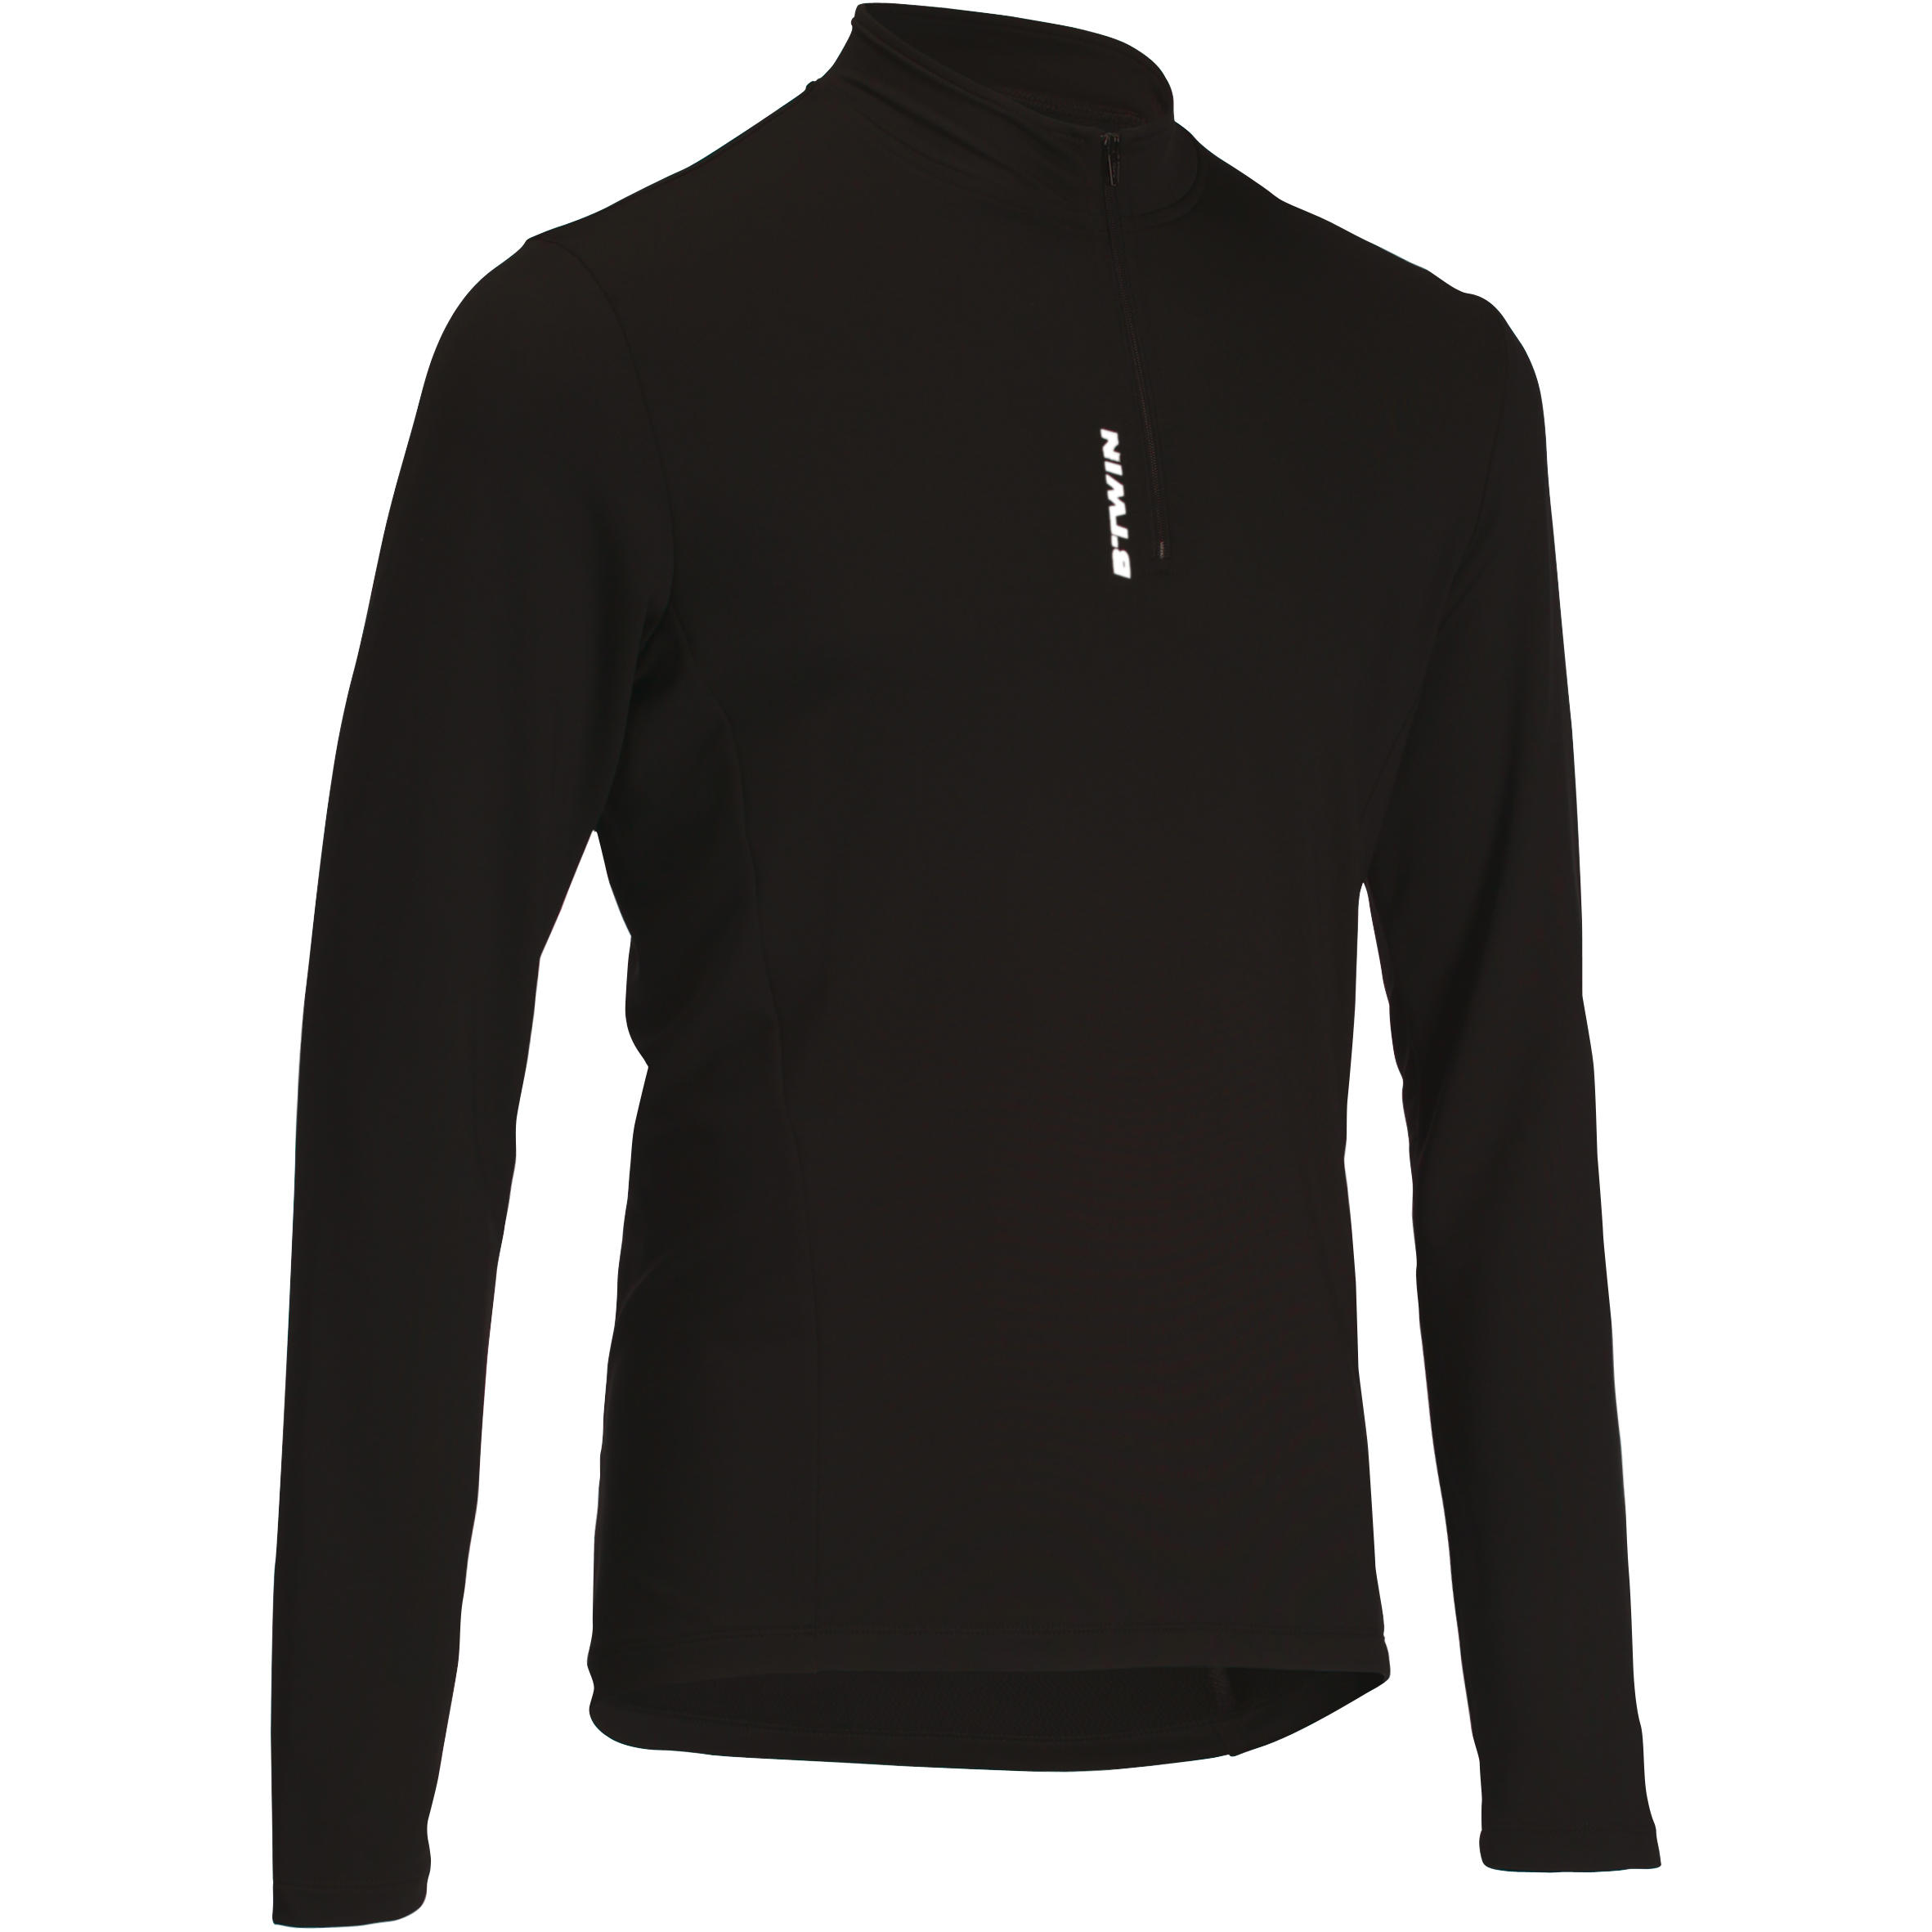 BTWIN 300 Long-Sleeved Cycling Jersey - Black